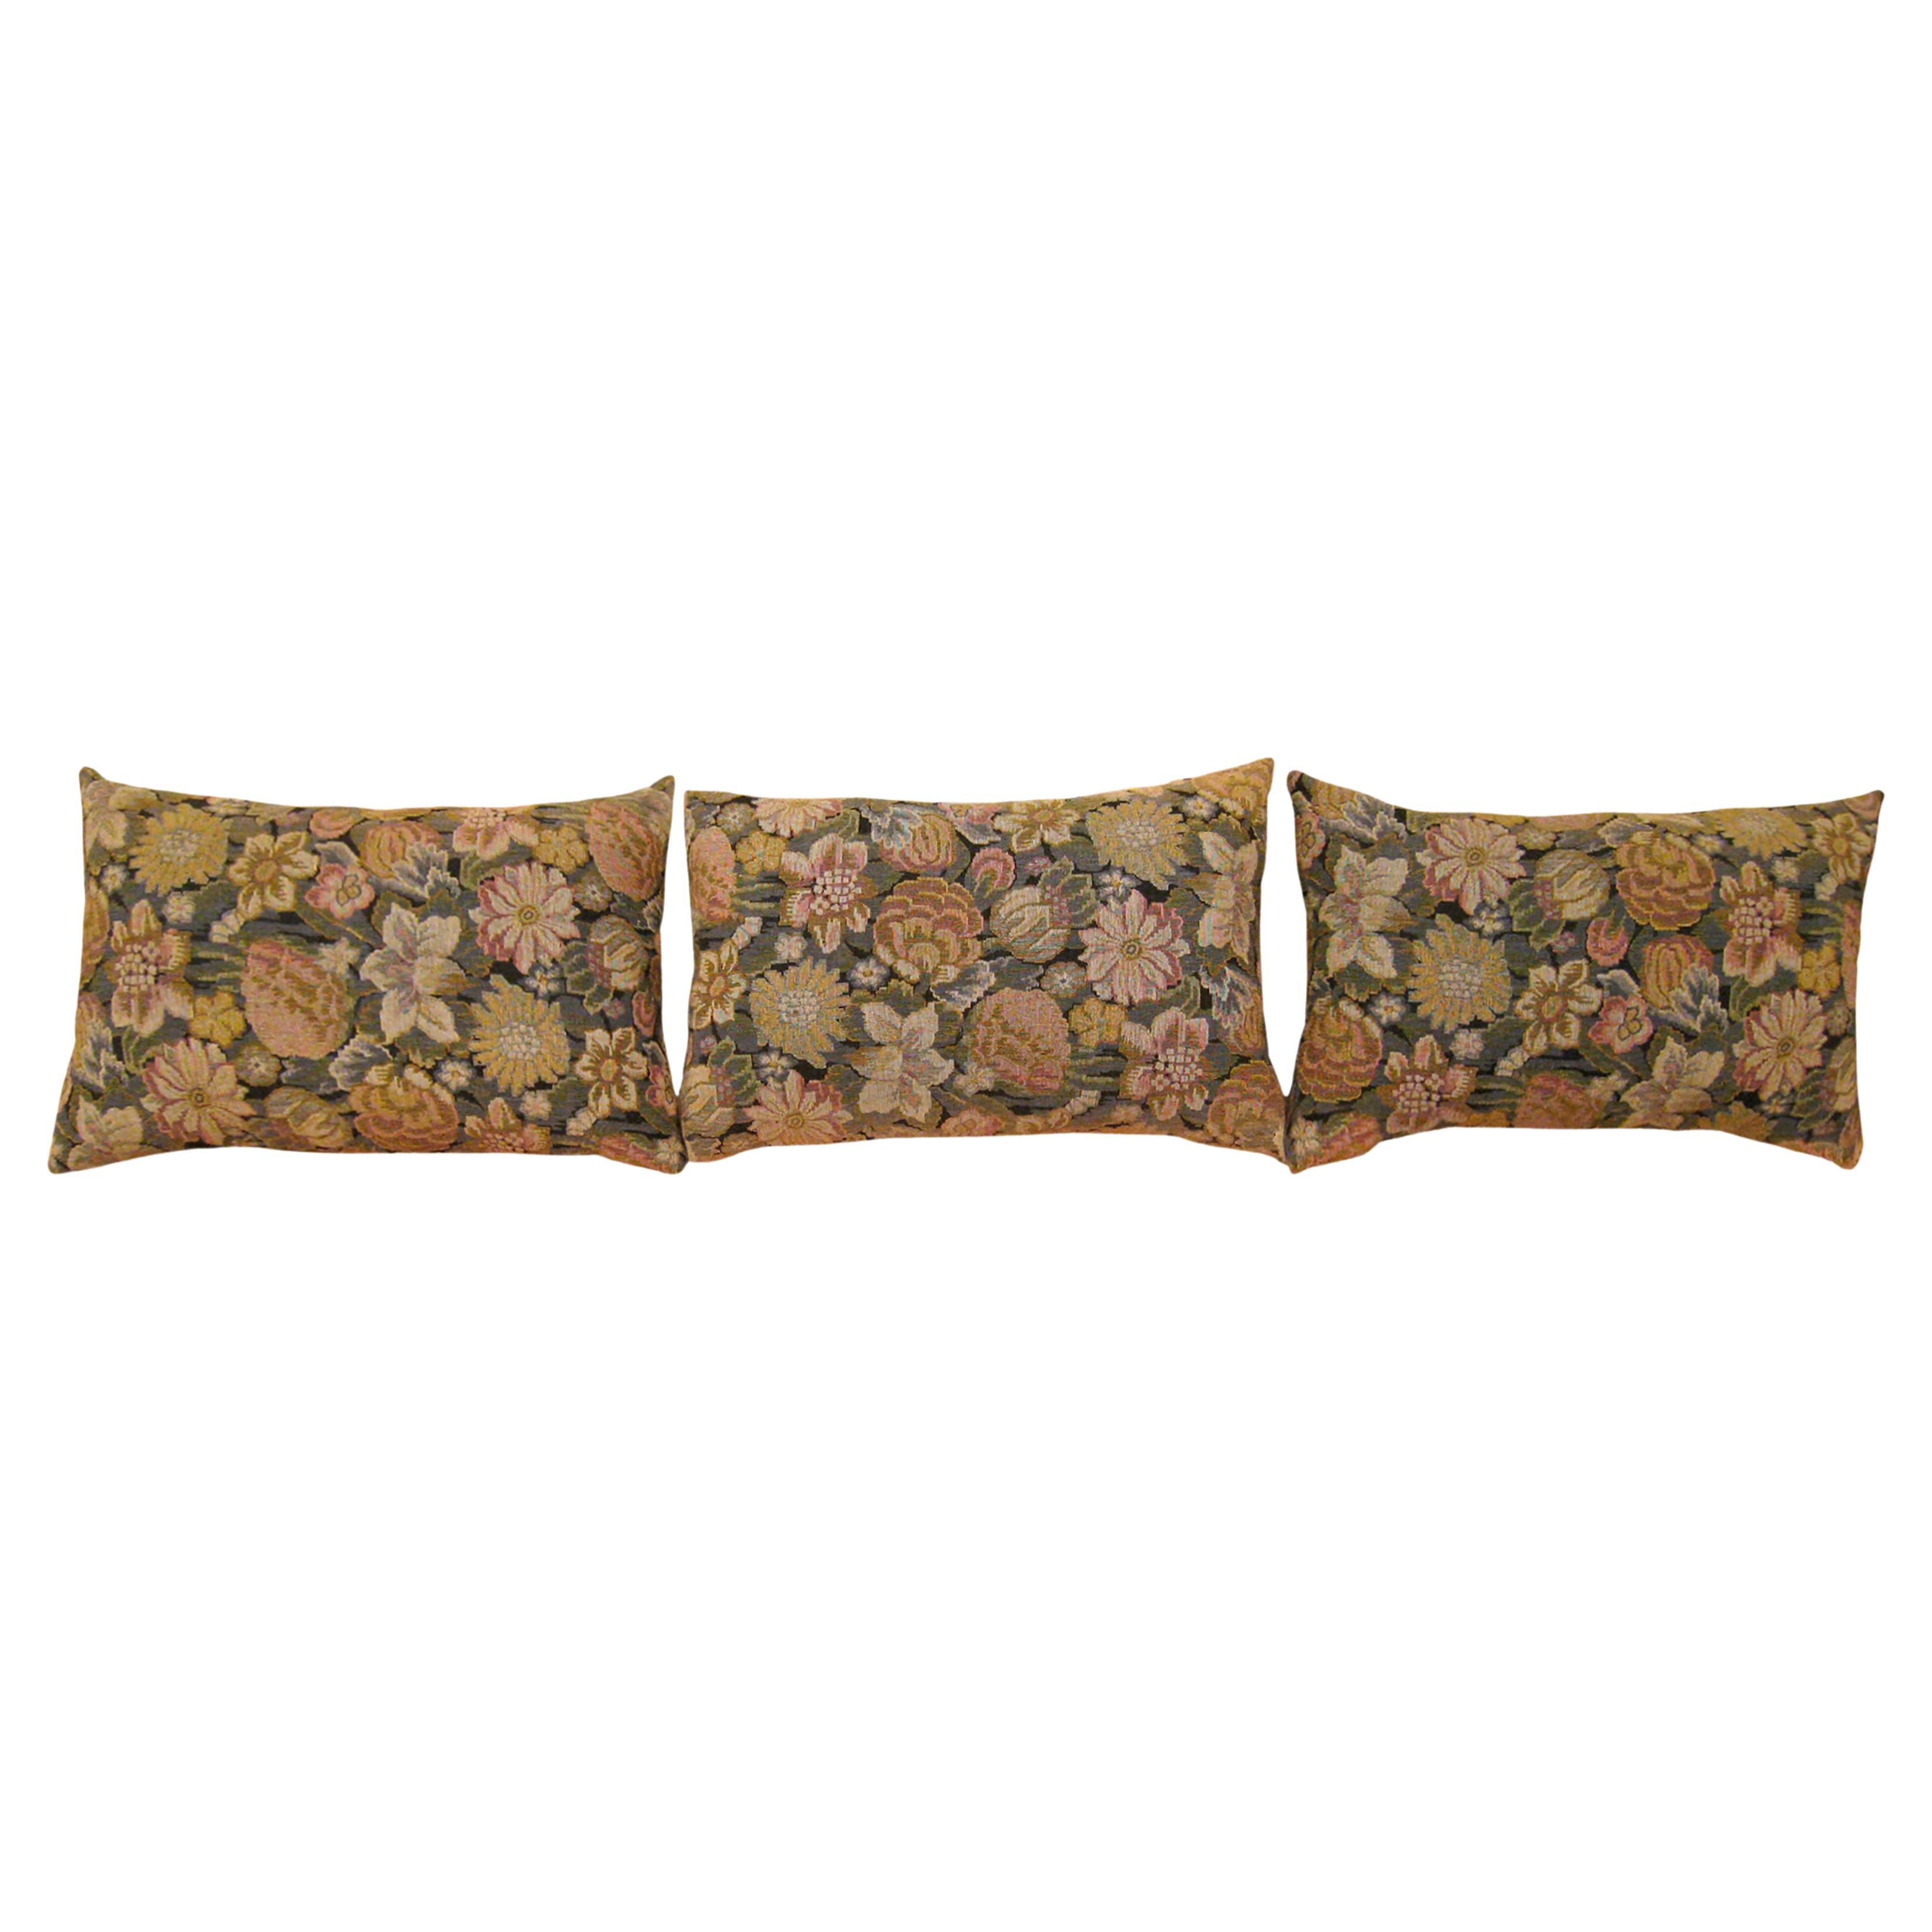 Set of Decorative Antique Jacquard Tapestry Pillows with Floral Elements For Sale